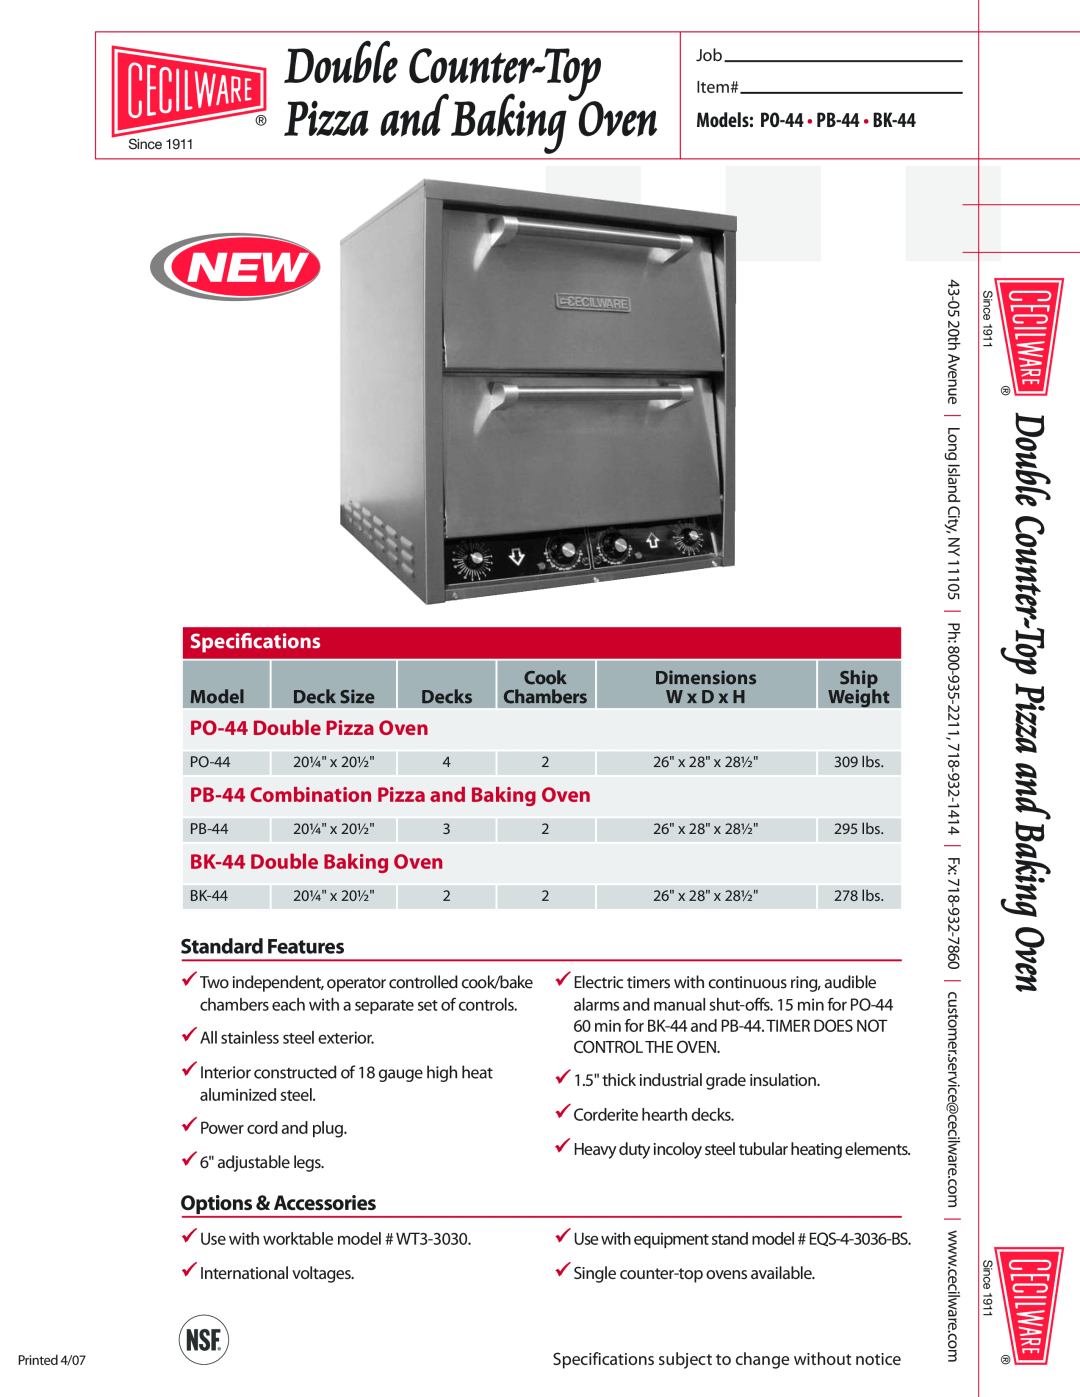 Cecilware PB-44 specifications Speciﬁcations, StandardFeatures, Options &Accessories, Model, Deck Size, Cook, Dimensions 